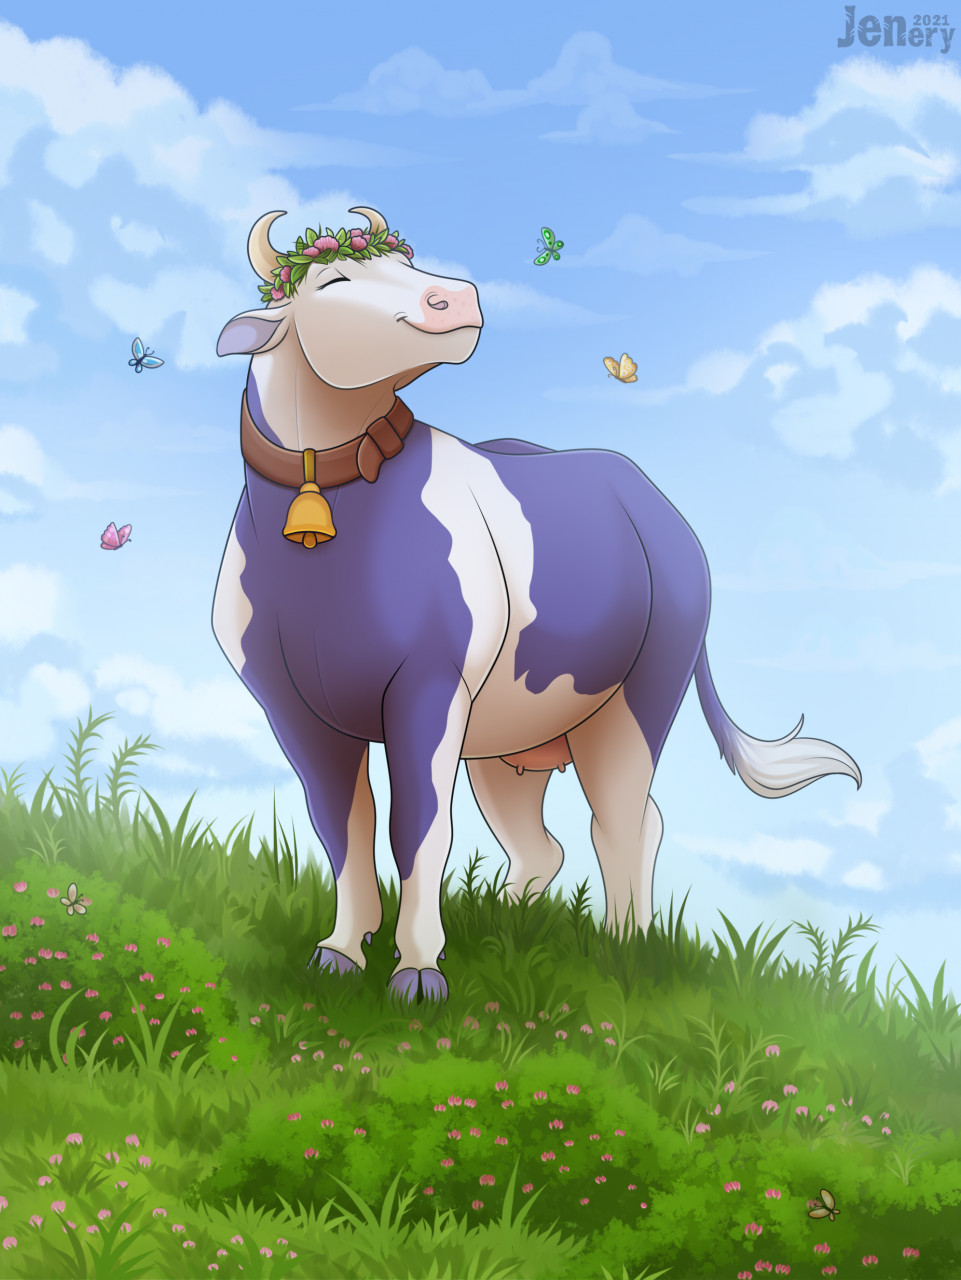 Anime Cow Hd Transparent, Year Of The Cow Animal Animal Cartoon Cow, Cute,  Cartoon, Hand Draw PNG Image For Free Download